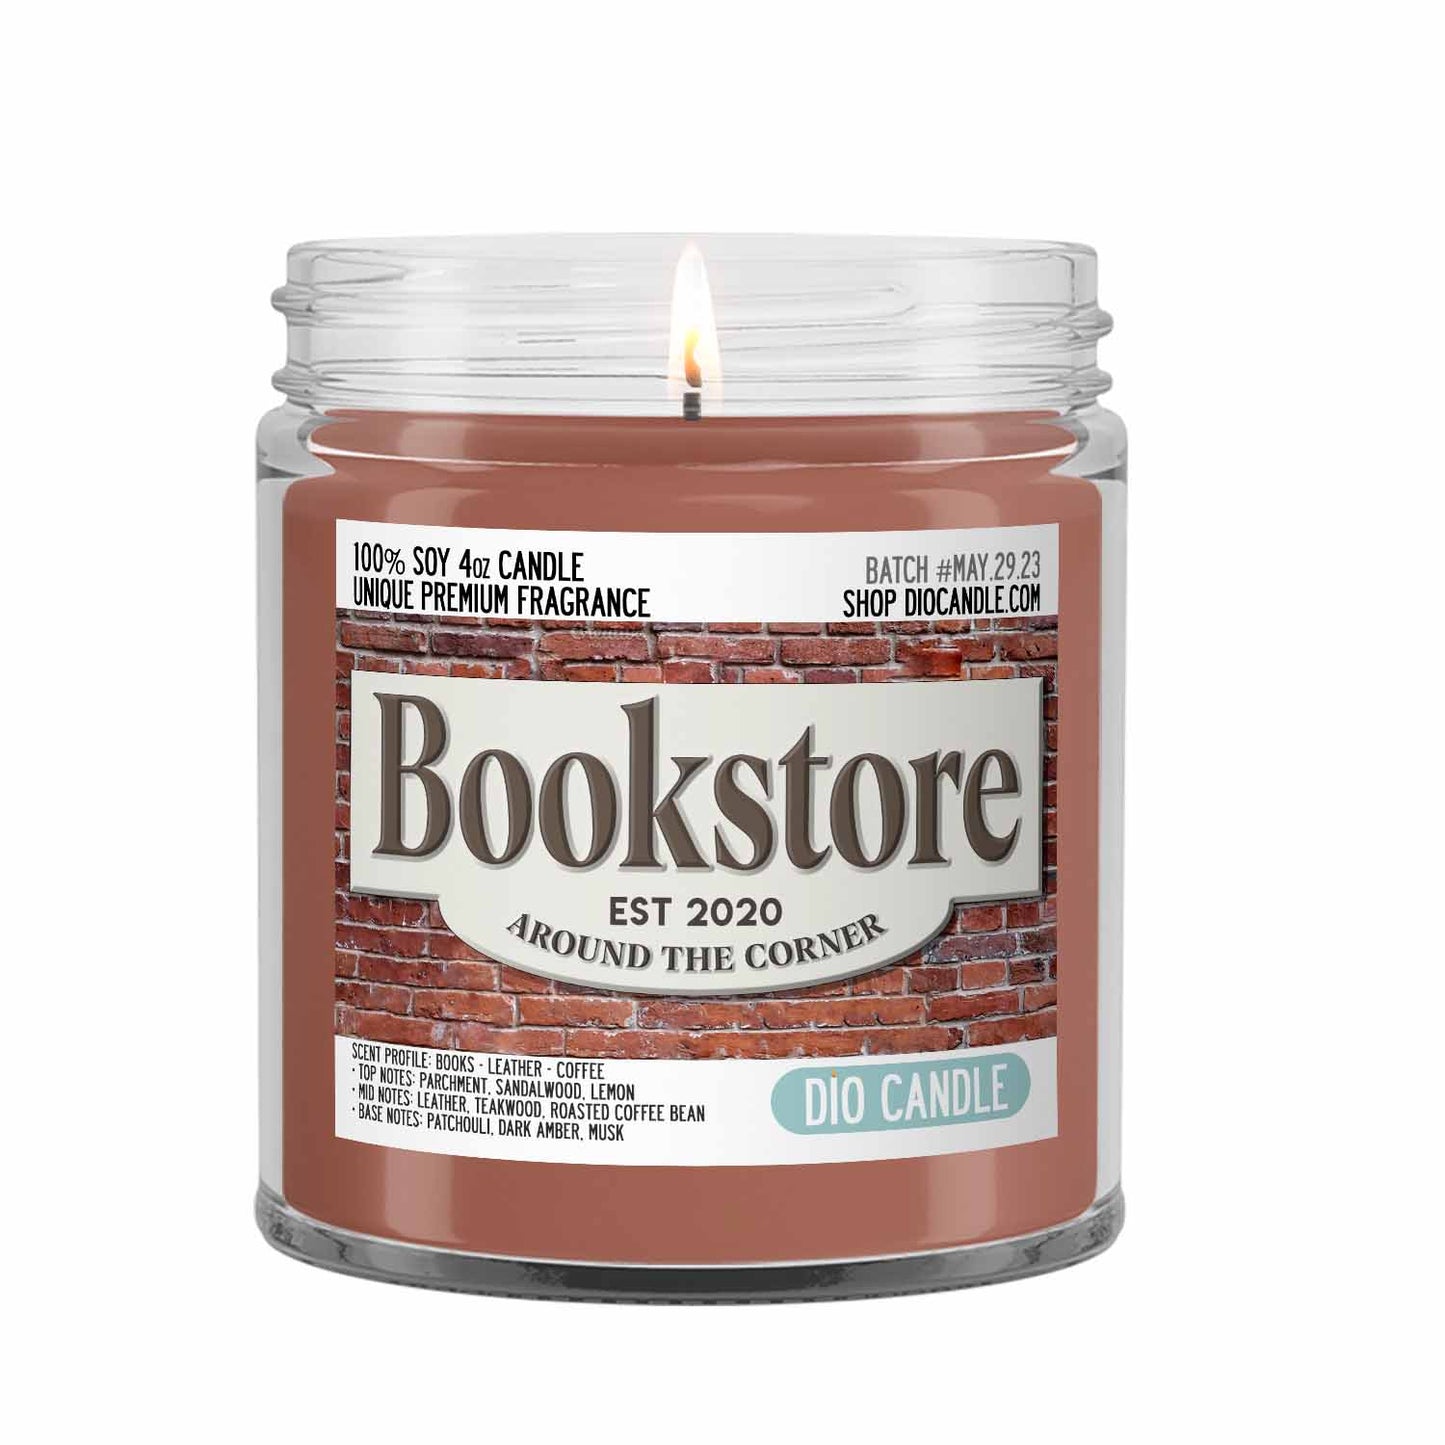 book lovers candle, leather scented candle, library scented candle — Oak  City Scents Candles